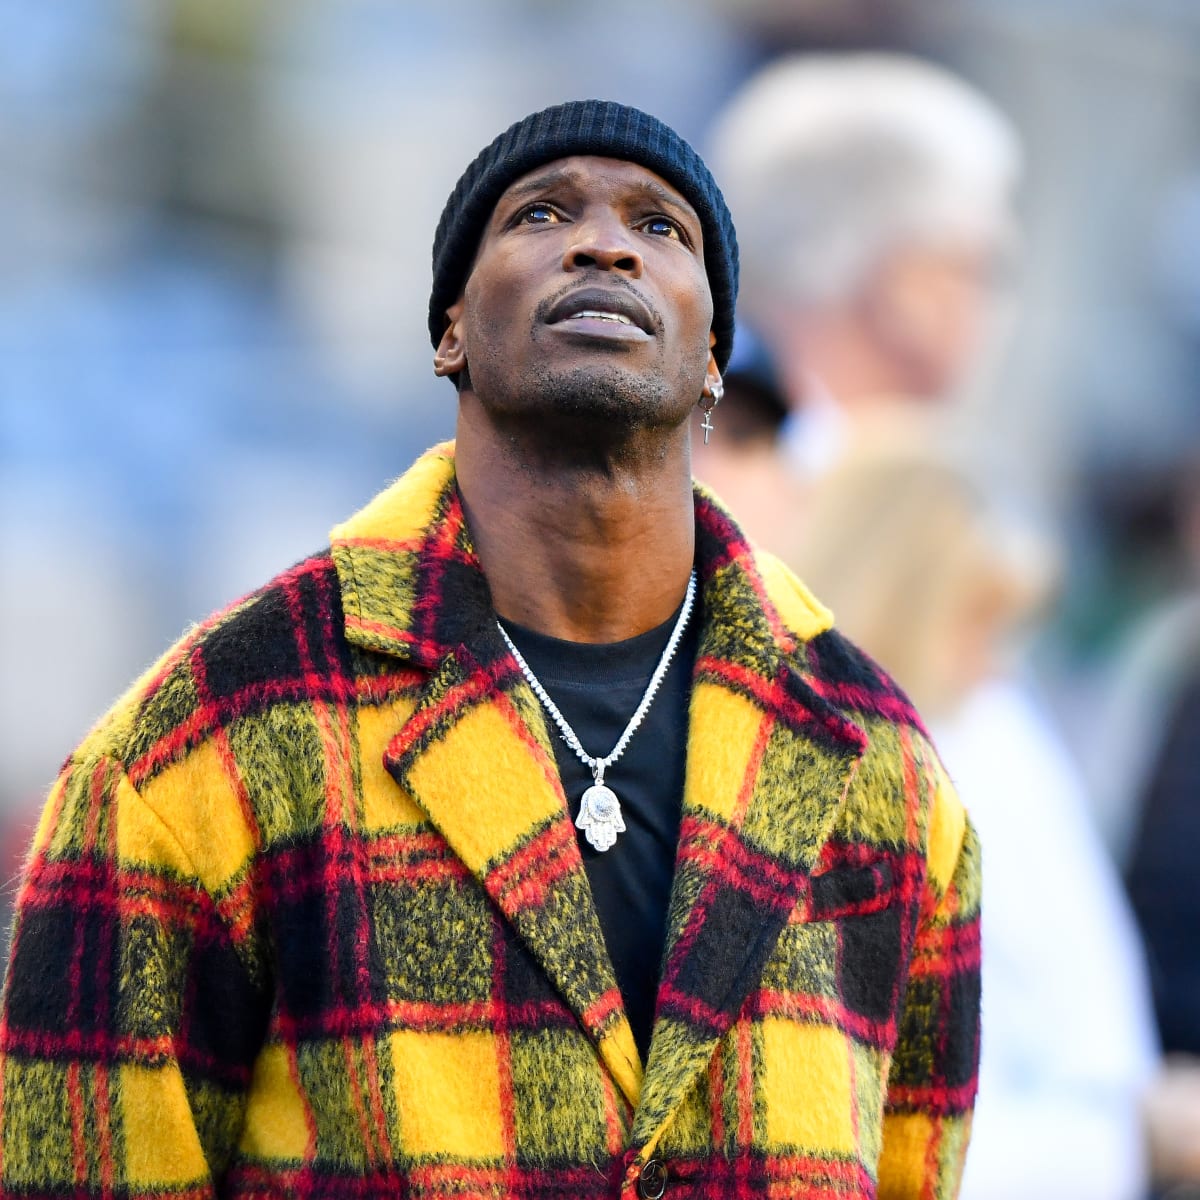 Terrell Owens & Chad Johnson Make Their Pitch To Giants For Roster